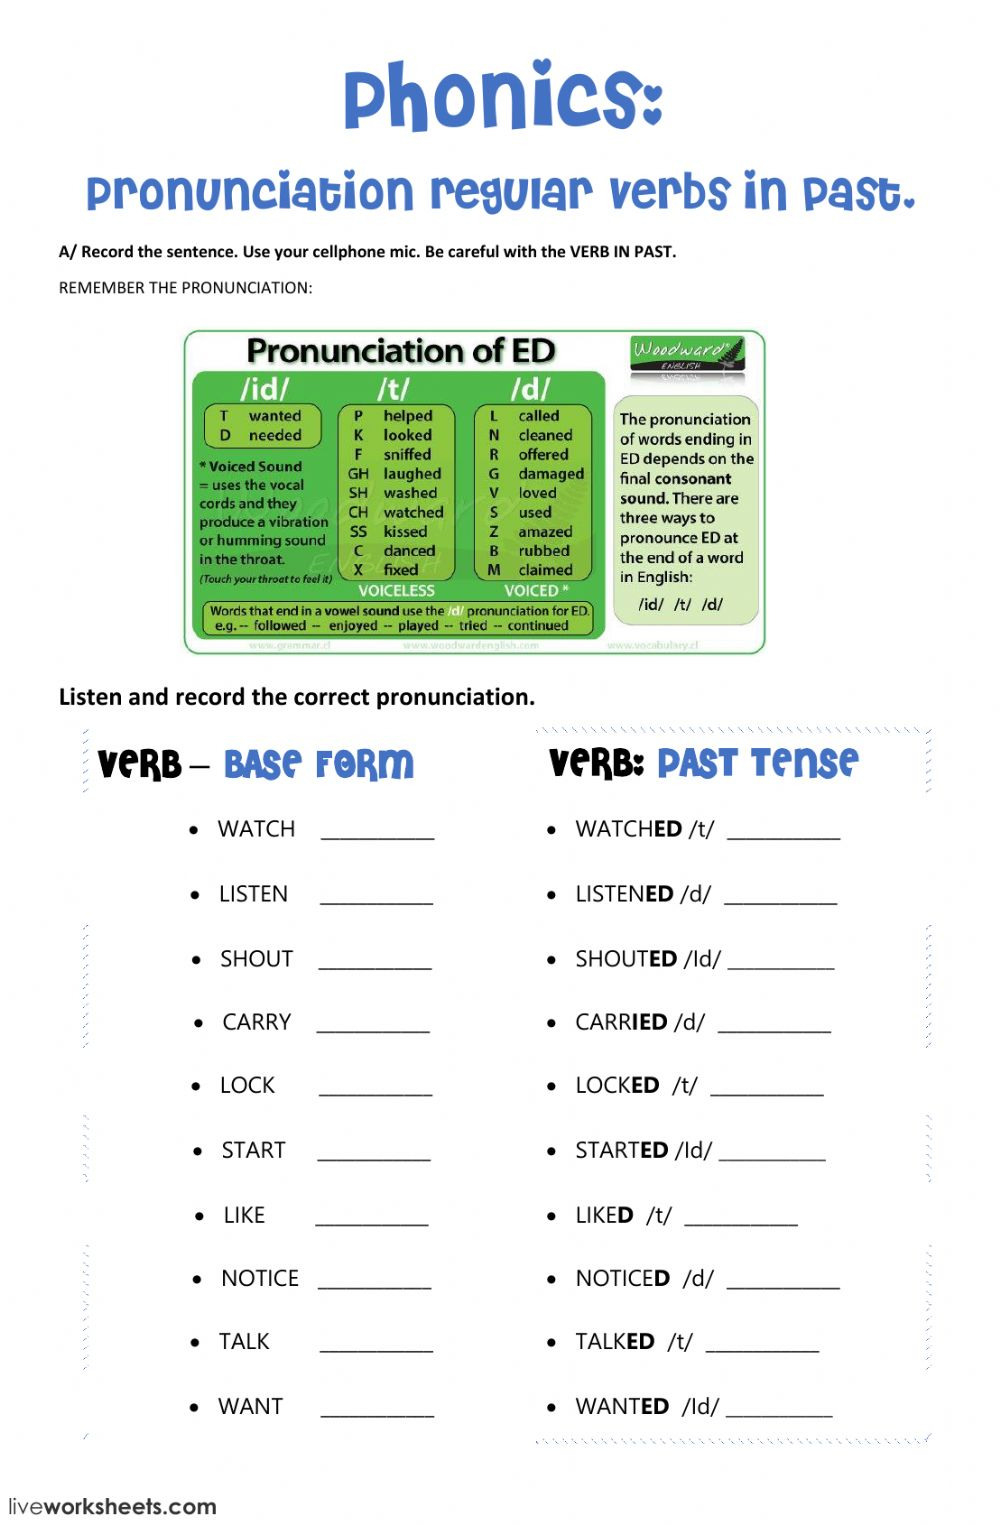 4th-grade-reading-comprehension-worksheets-multiple-choice-db-excelcom-time-esl-worksheet-by